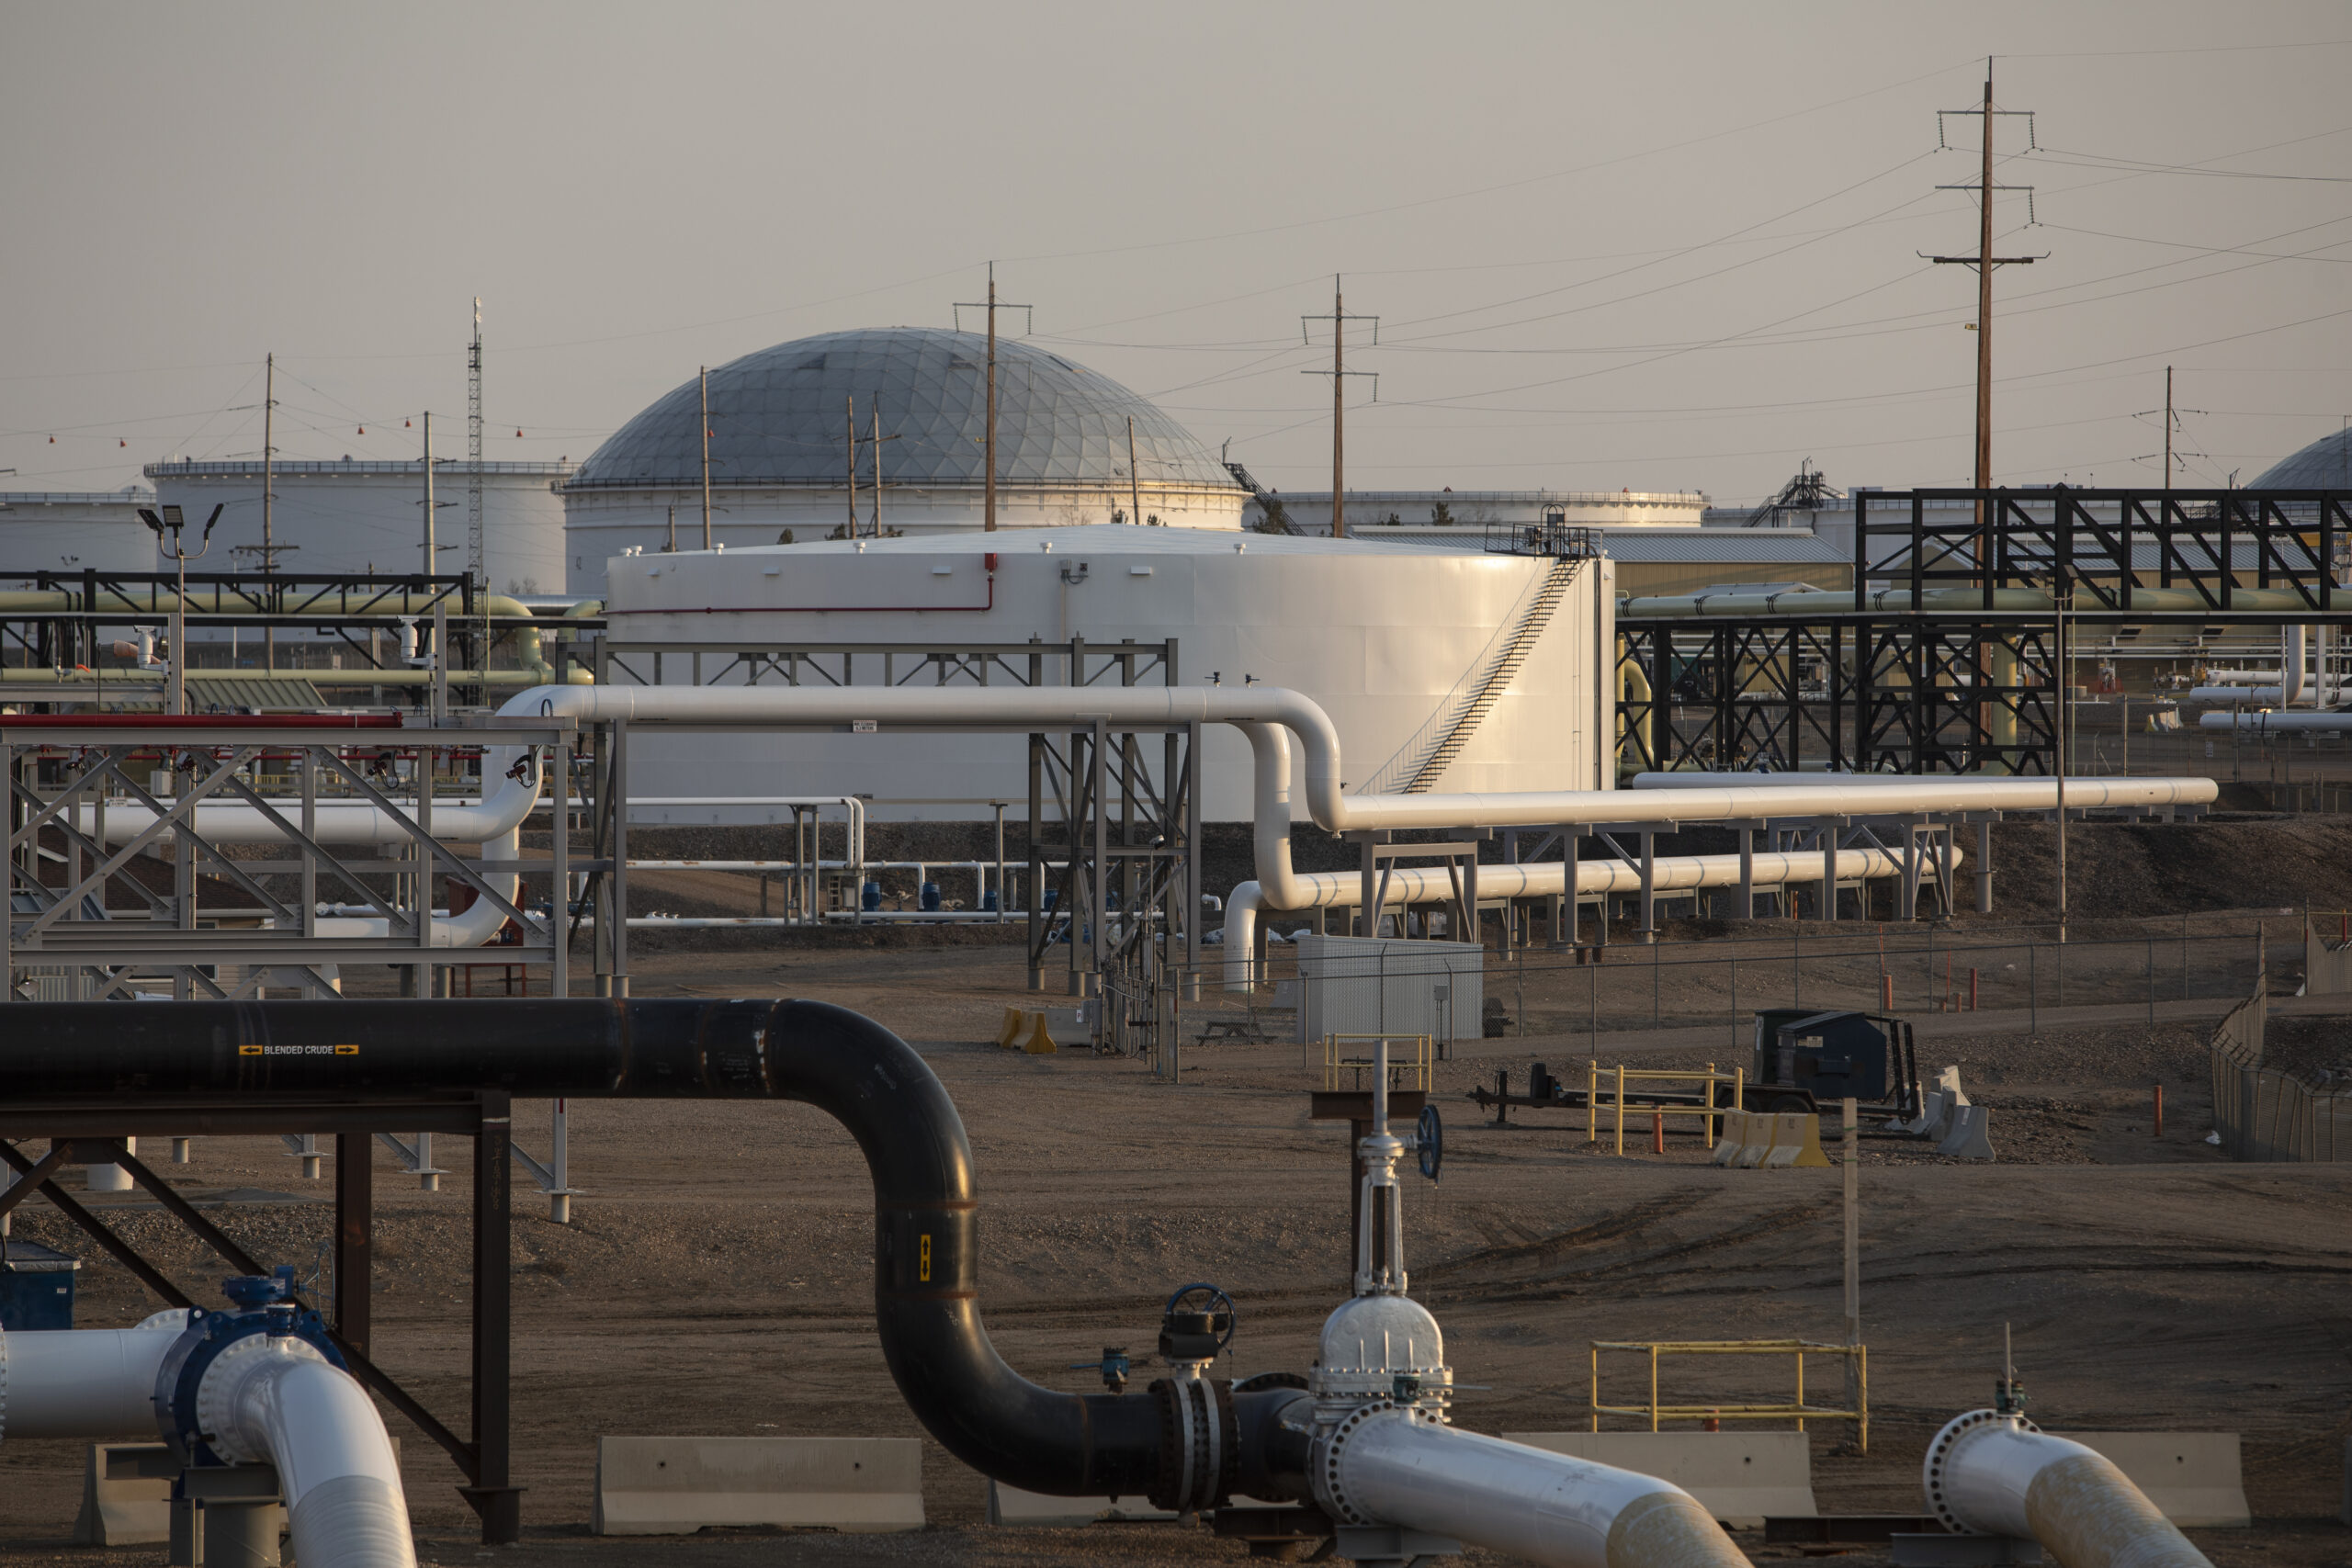 A series of pipes and storage tanks can be seen sitting atop a plain dirt field at dusk against a light brown sky.